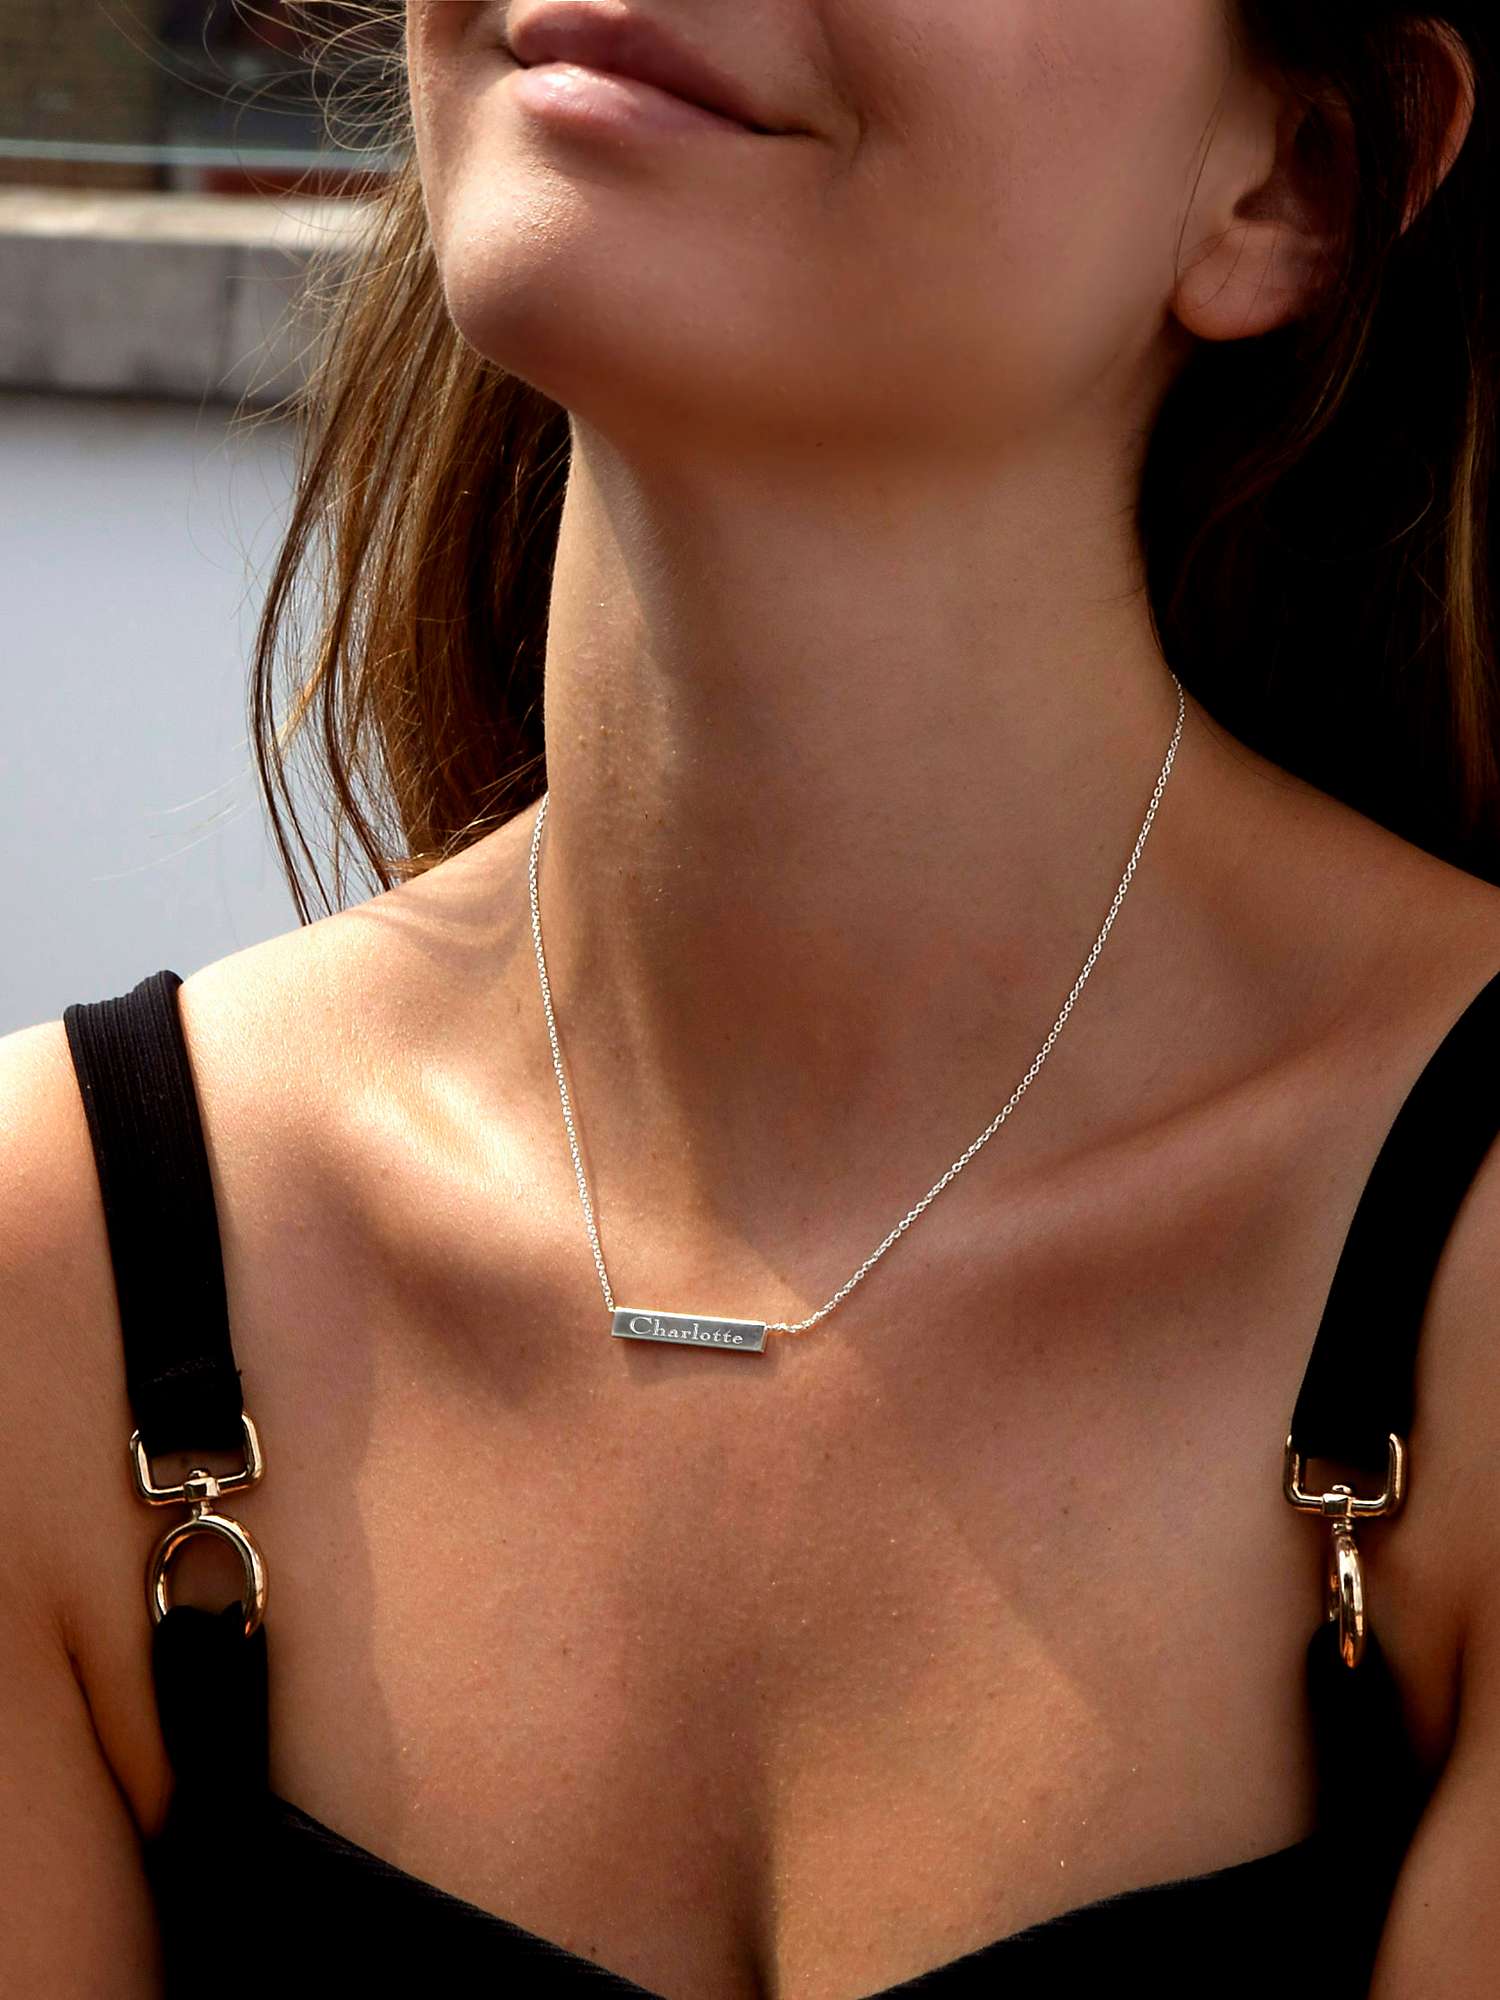 Buy IBB Personalised Small Horizontal Bar Initial Pendant Necklace, Silver Online at johnlewis.com